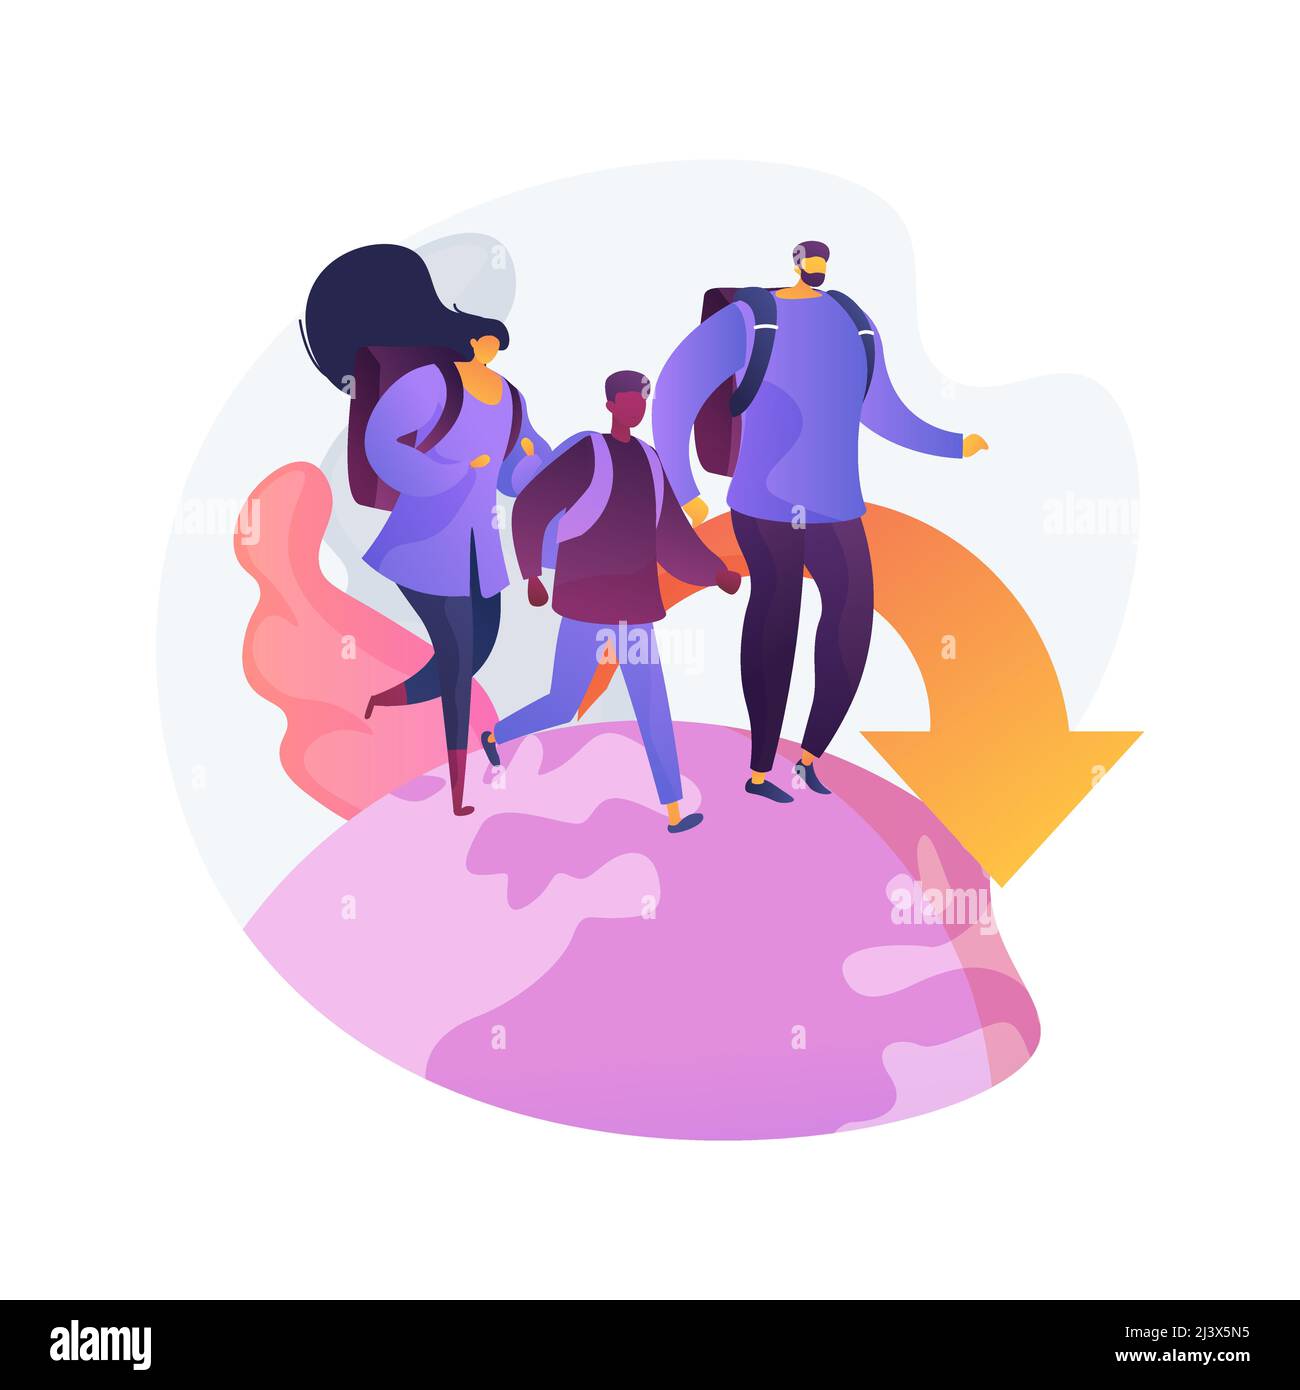 Internal migration abstract concept vector illustration. Domestic human migration, natural disaster, civil disturbance, arrive in capital, people with Stock Vector